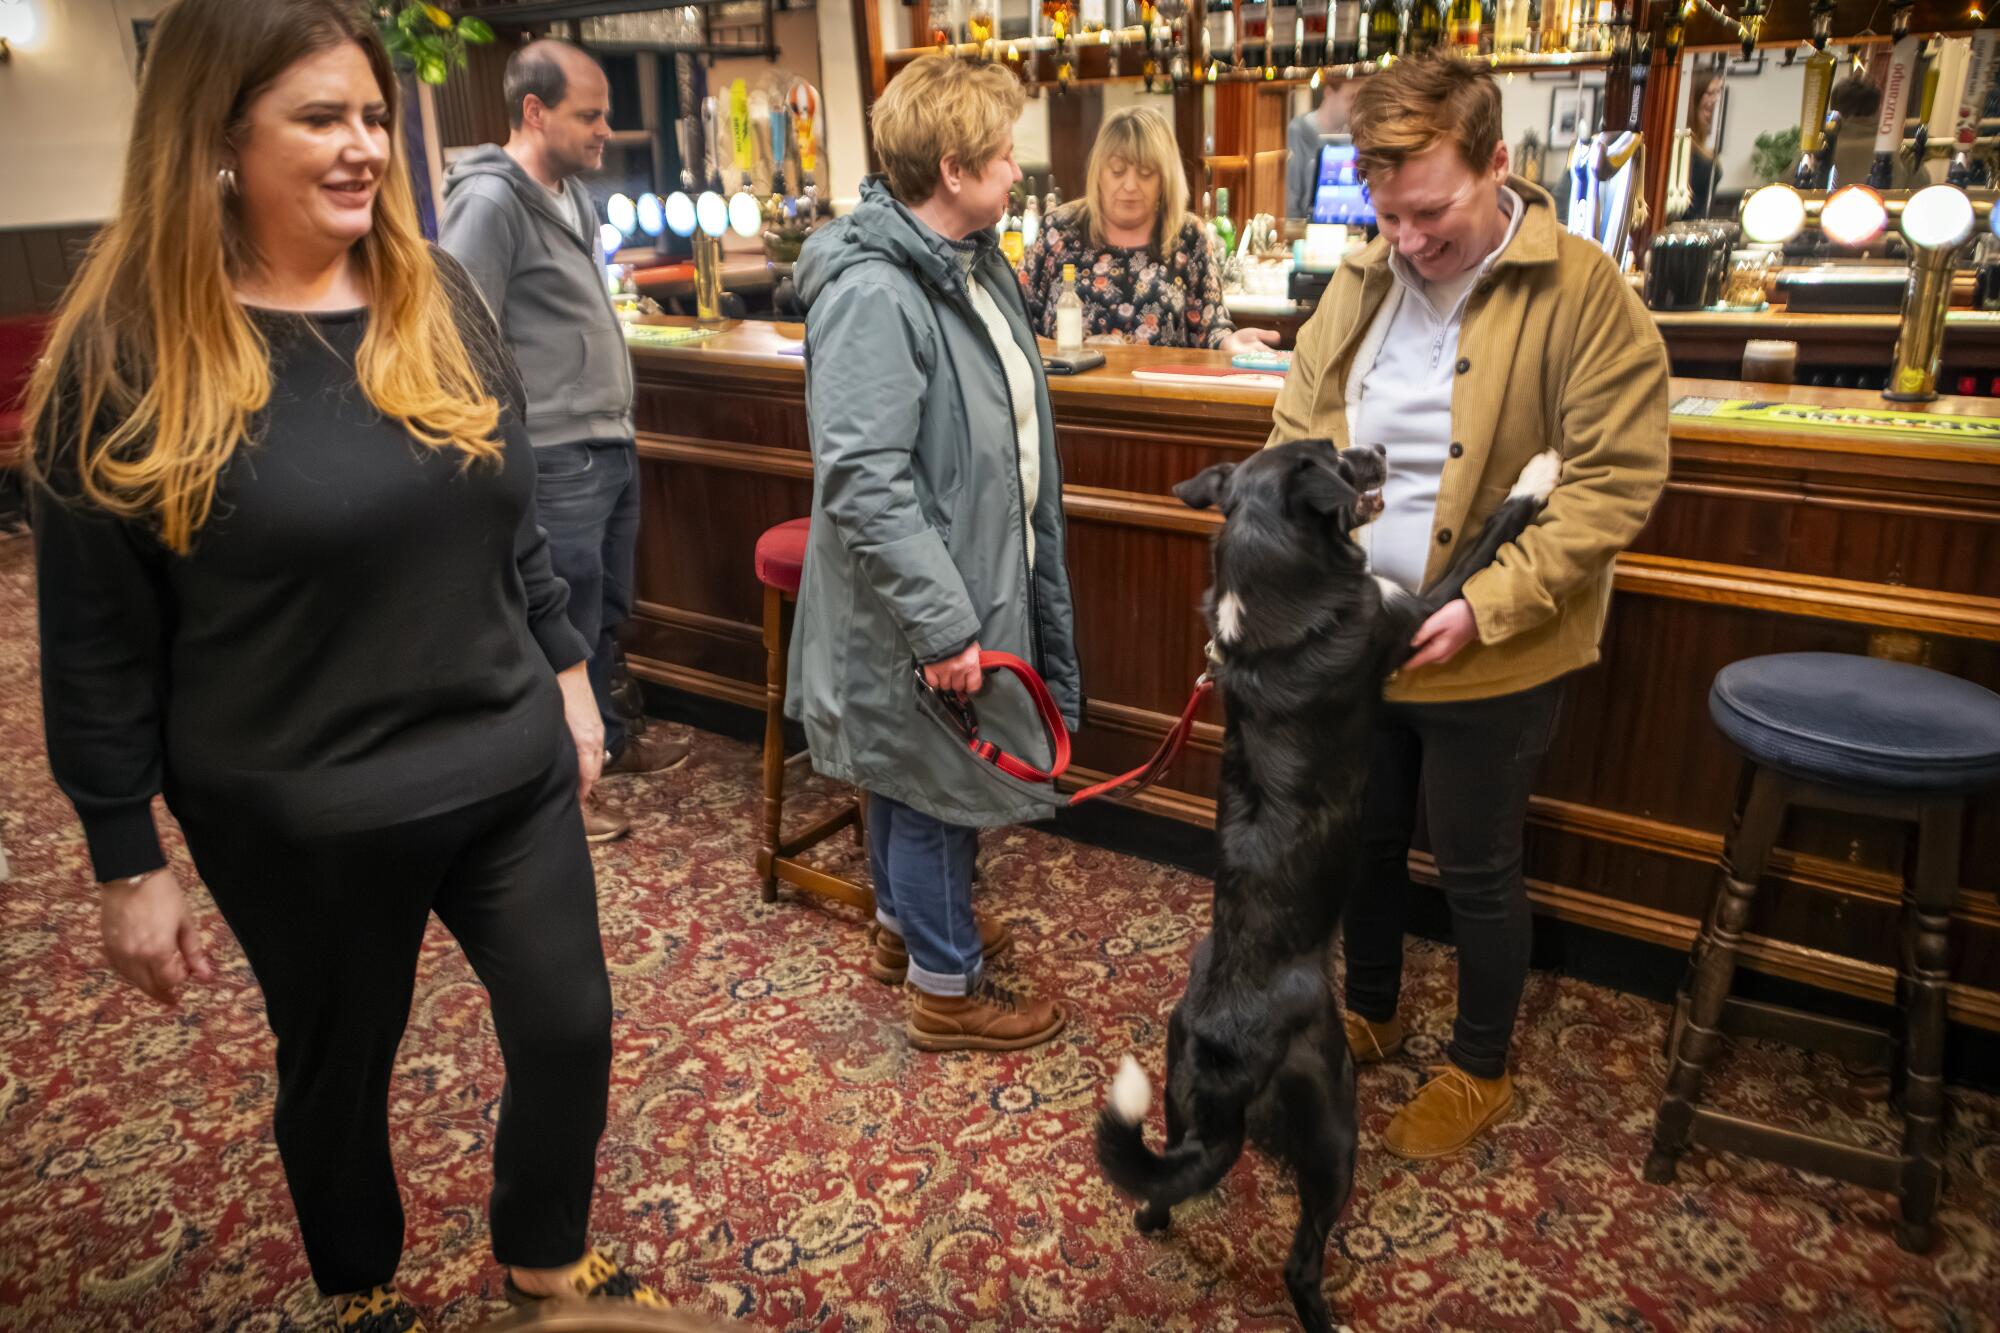 A dog on its hind legs puts its front paws up on a person standing next to a bar  